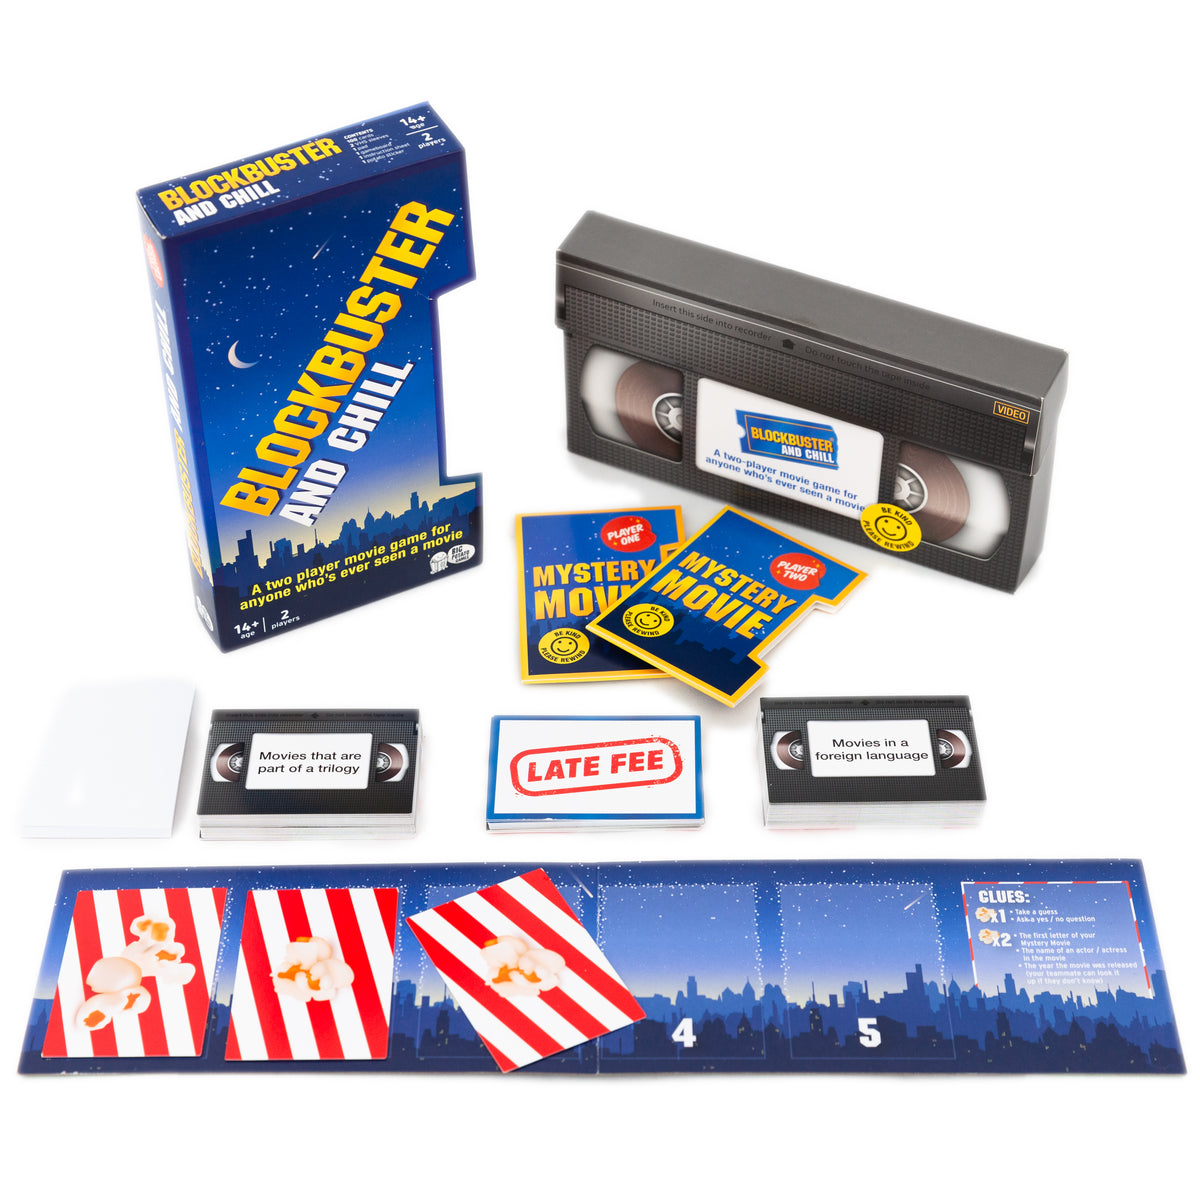 An image showing the contents of this boardgame box in the style and theme of a VHS videotape/movies. 